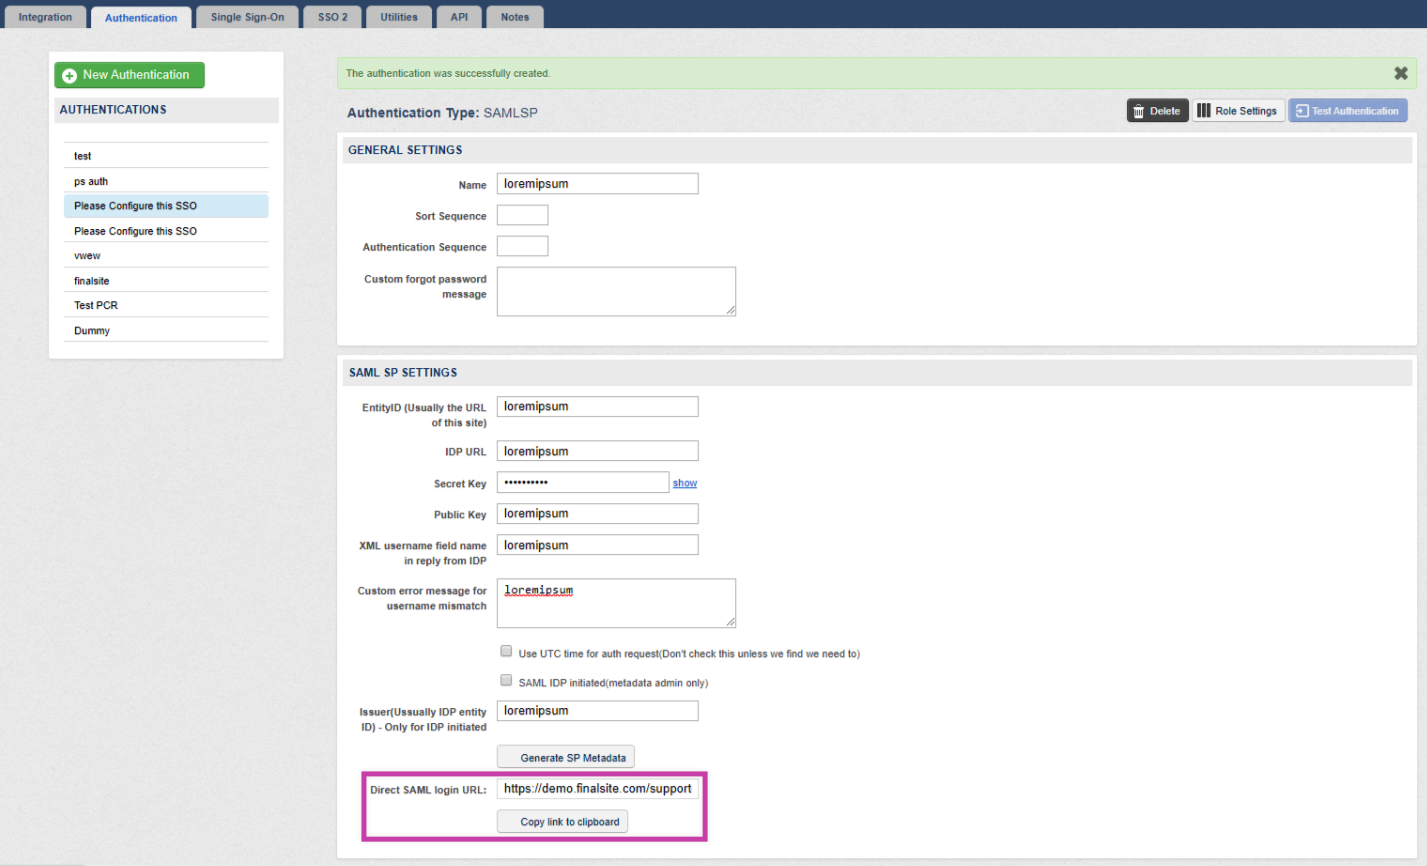 Location of Direct SAML login URL highlighted on Authentication configuration details screen